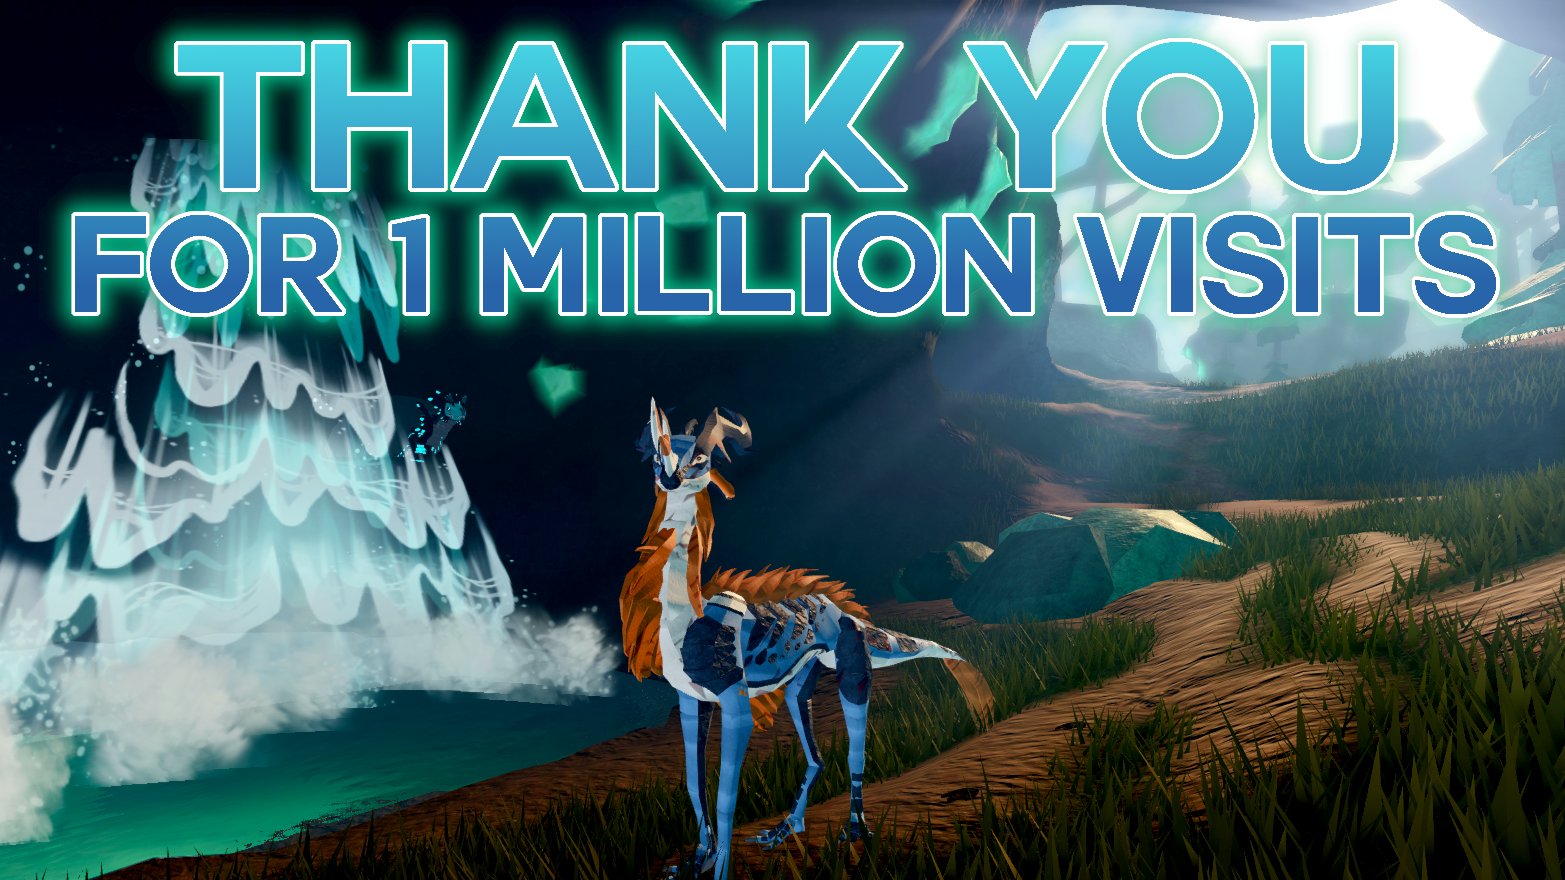 Sonar Studios on X: 🎉 Creatures of Sonaria hit 1 million visits today! 🎉  Thank you so much for supporting our gamehere's to the next million!  Still haven't played? Join Sonar to